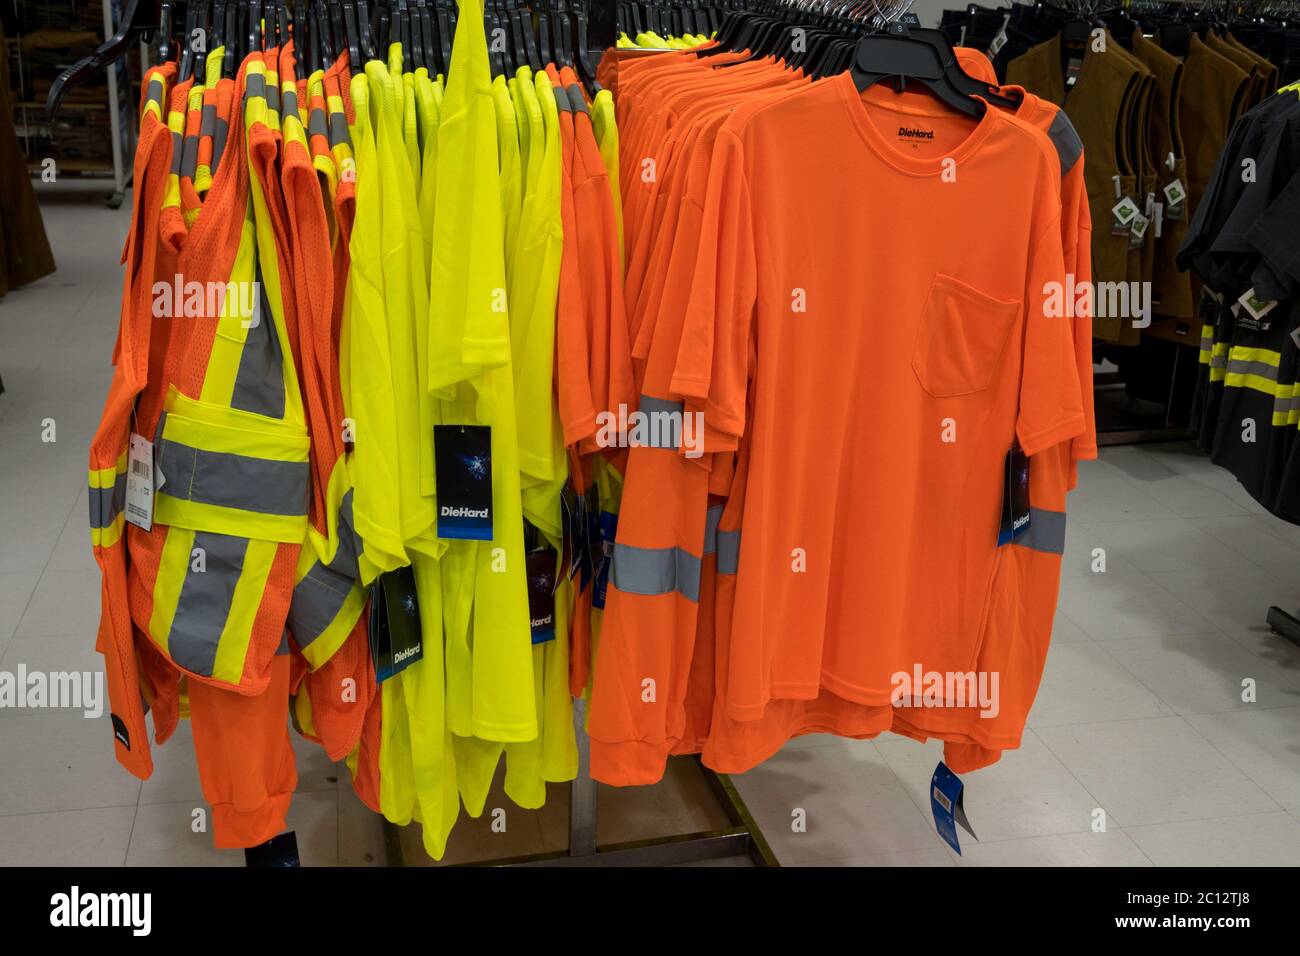 Neon colored industrial shirts and vests, USA Stock Photo